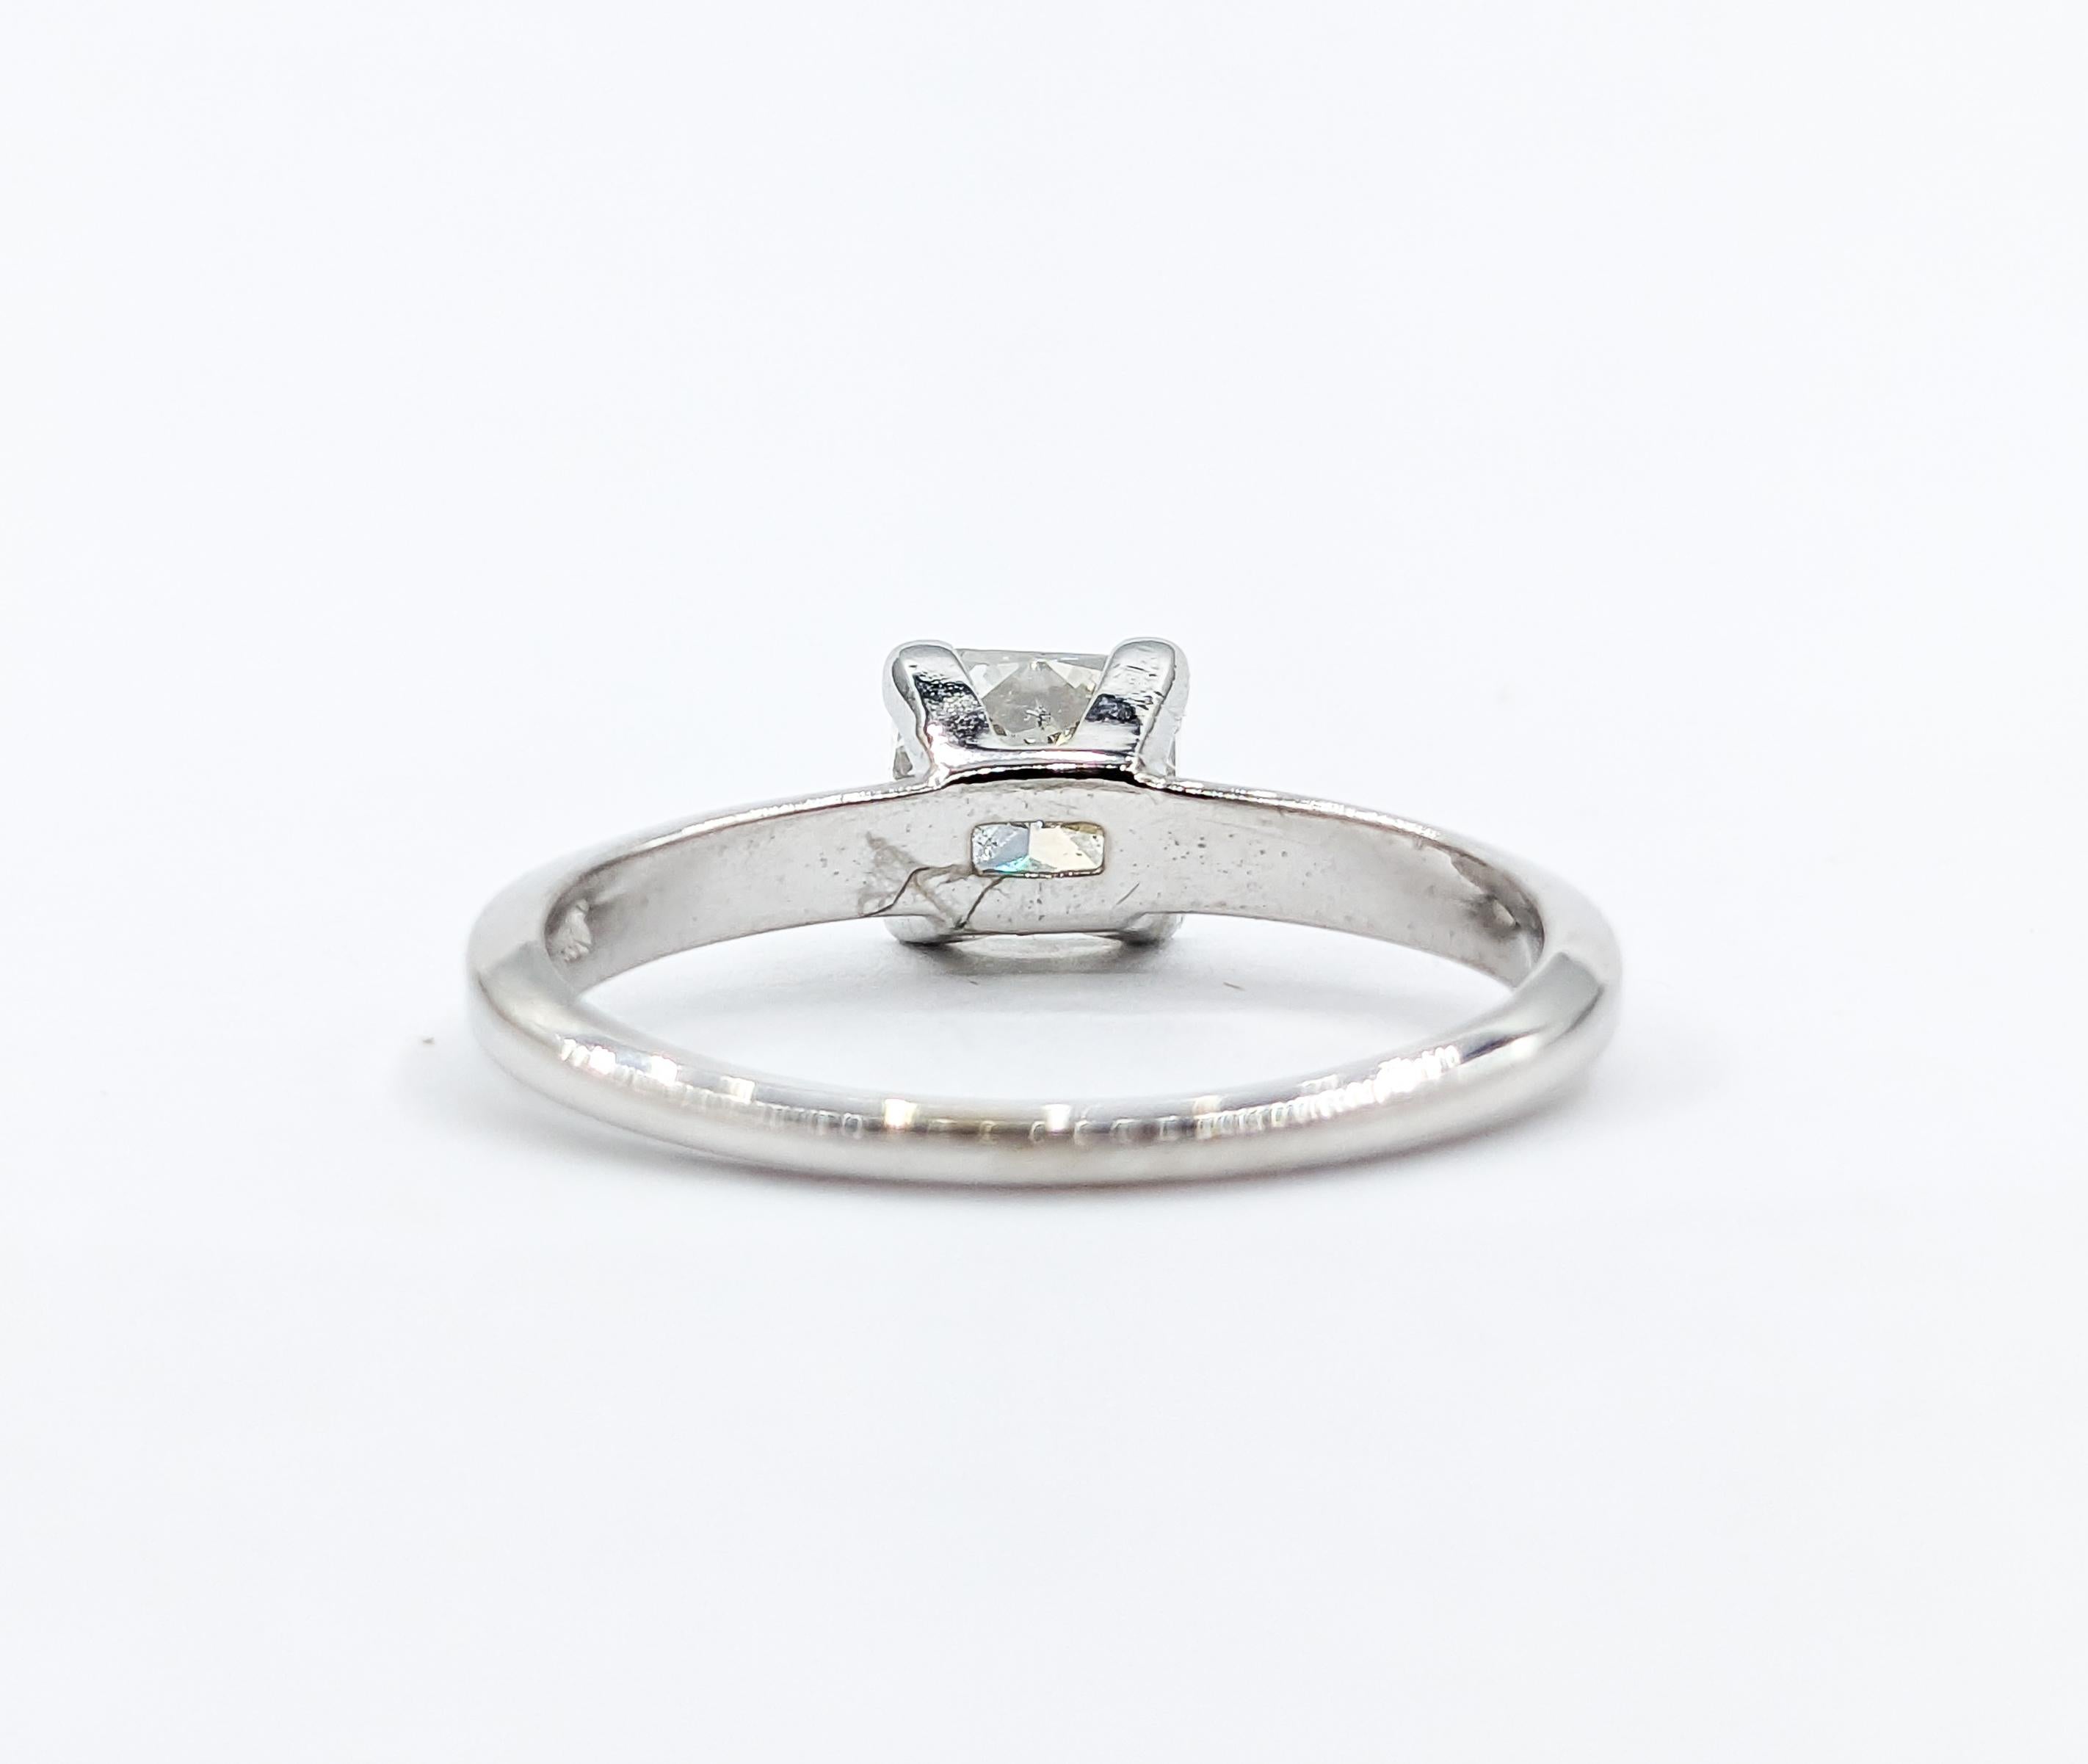 1.05ctw Diamond Ring In White Gold

Introducing this exquisite Solitaire Ring, expertly crafted in 14 karat white gold. It showcases a stunning 1.05 carat radiant diamond, which captures the light beautifully with its SI clarity and near-colorless